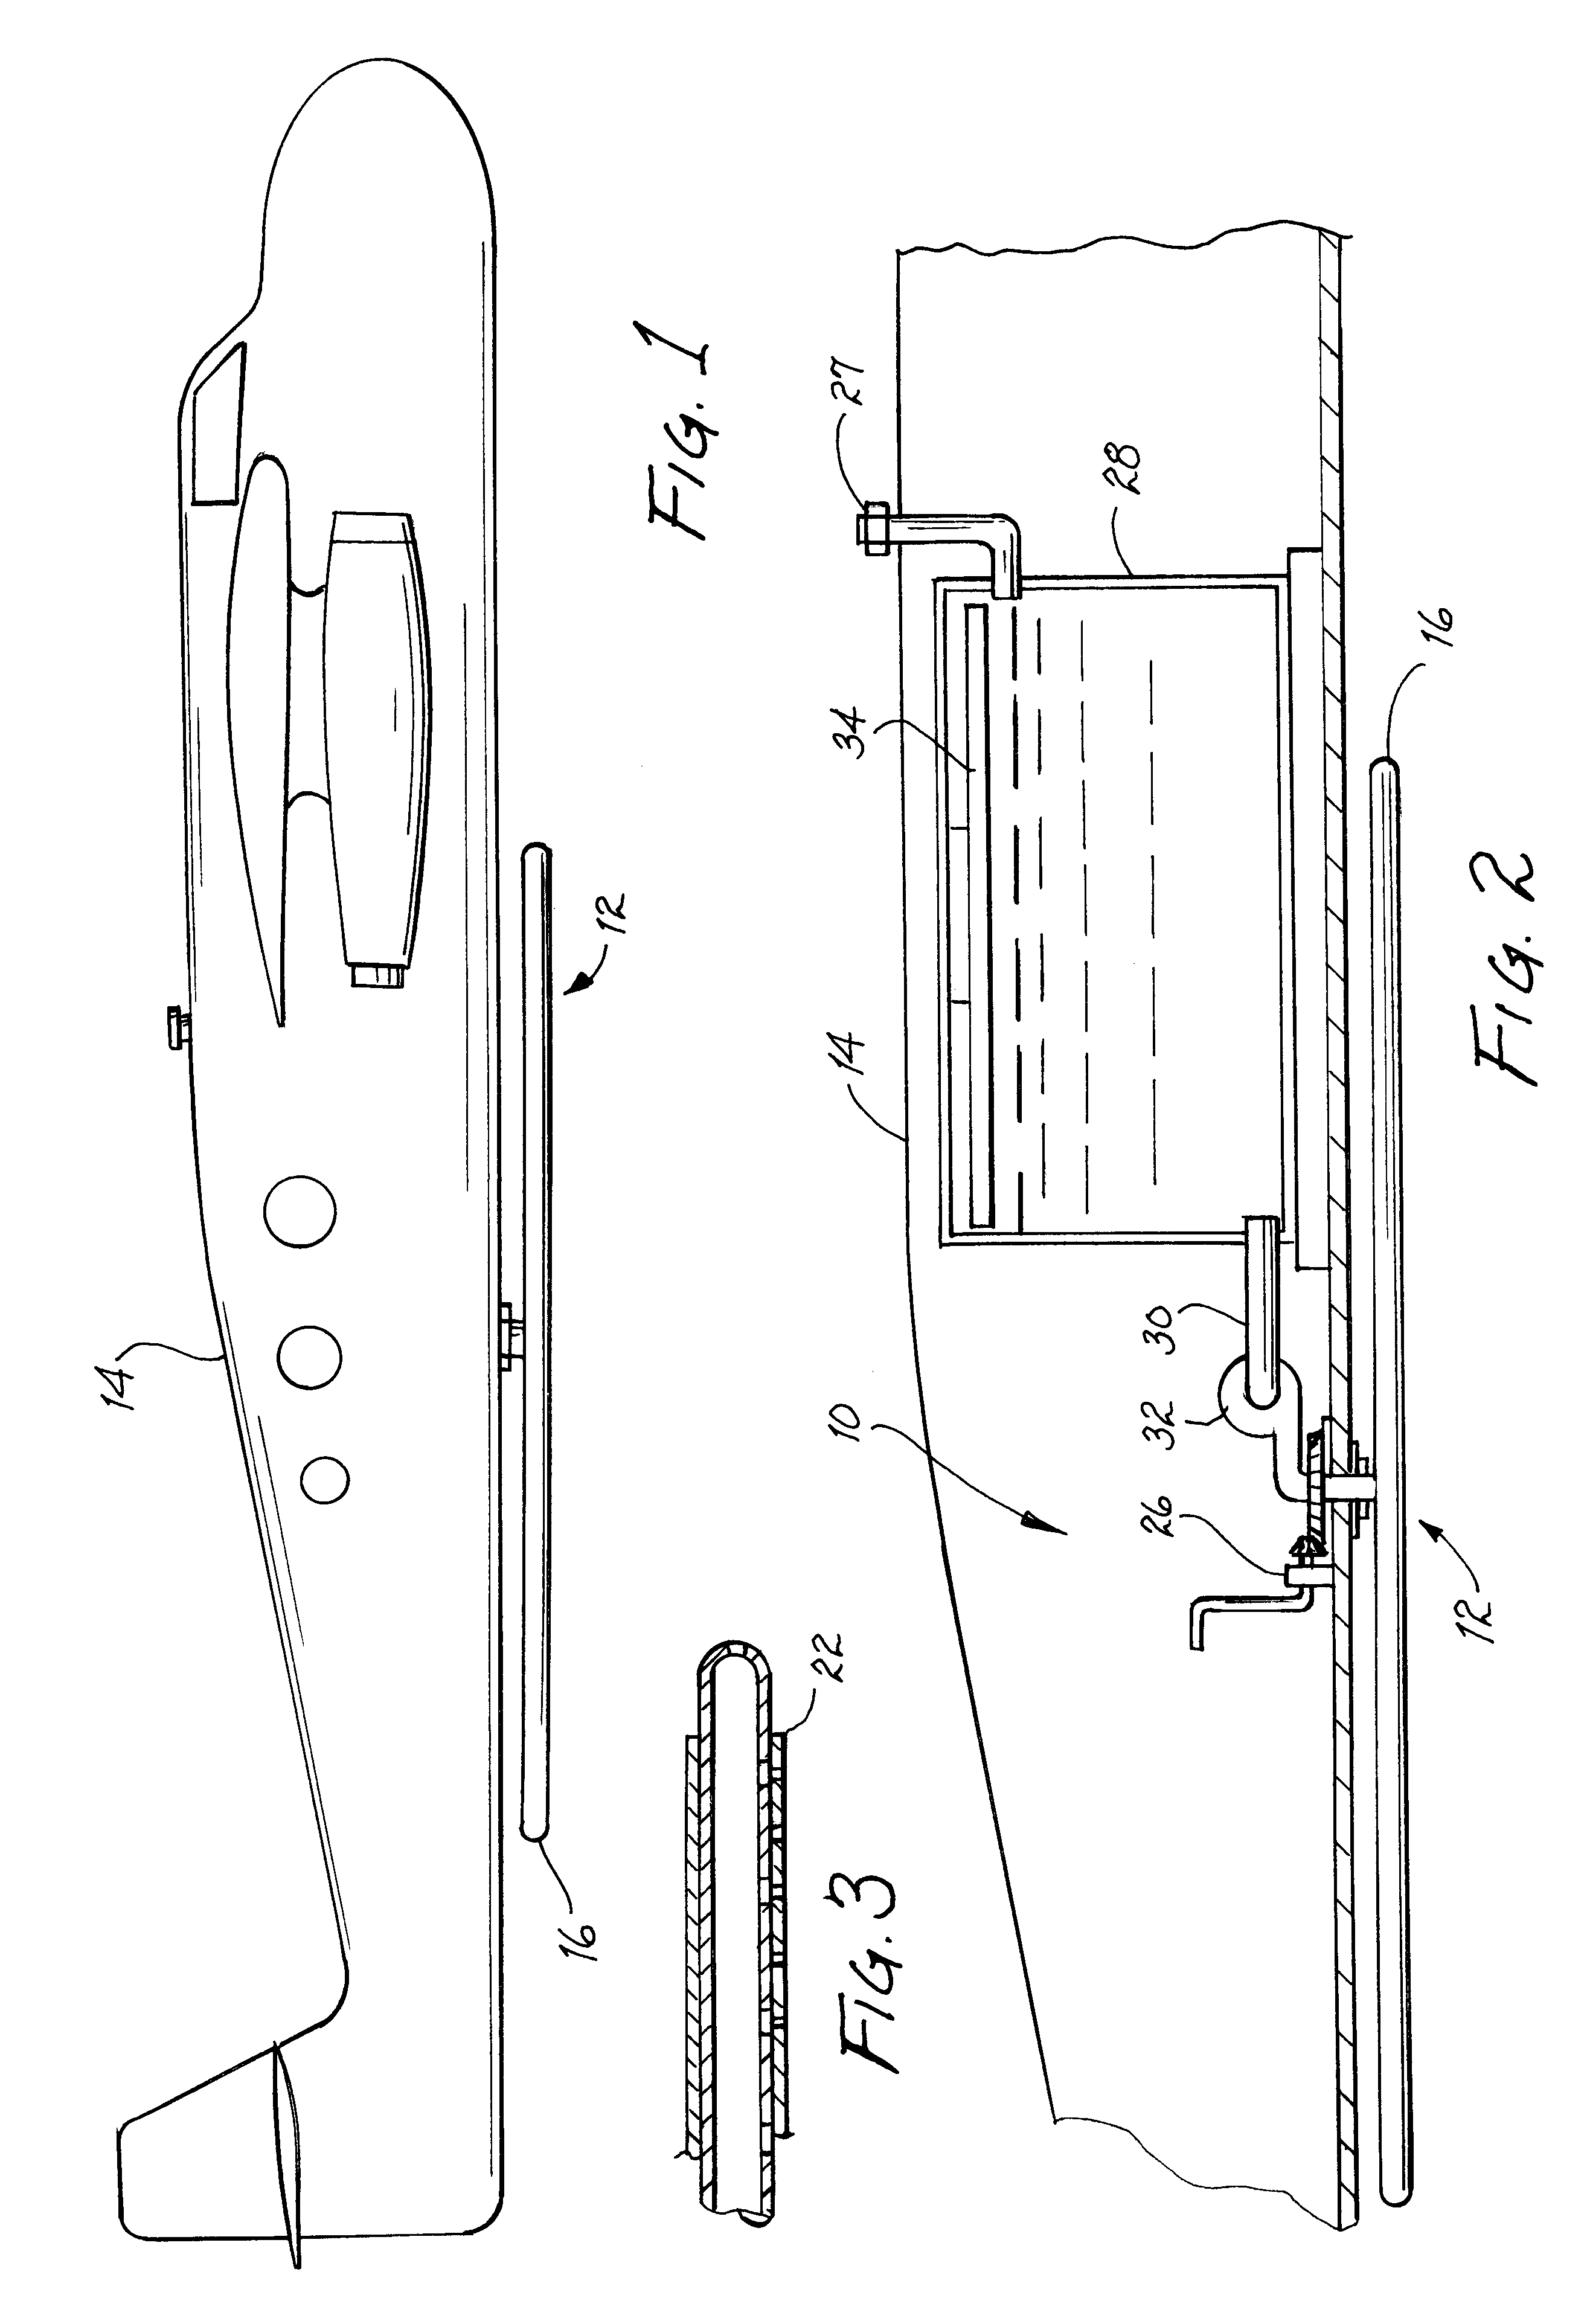 System for extinguishing wild fires and method therefor